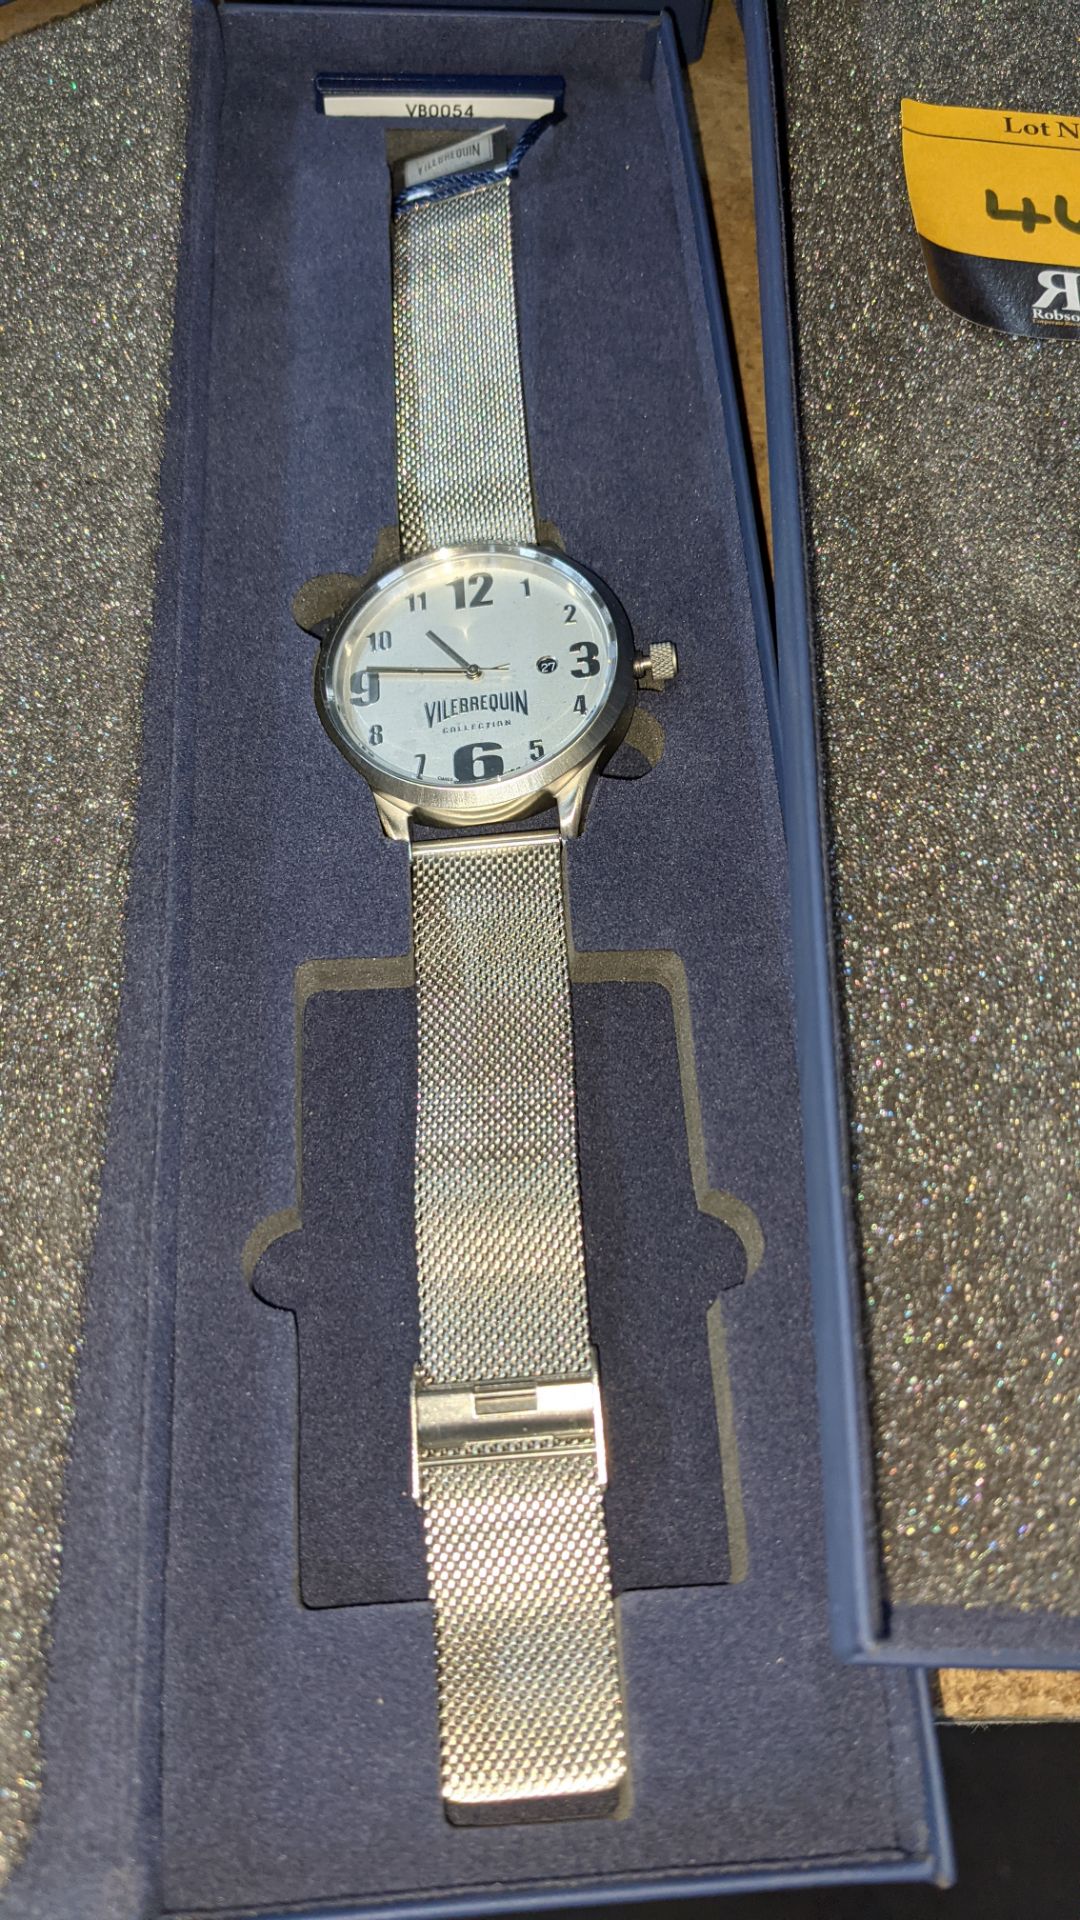 Vilebrequin Limited Edition Swiss movement 100m water resistant stainless steel case watch in silver - Image 2 of 7